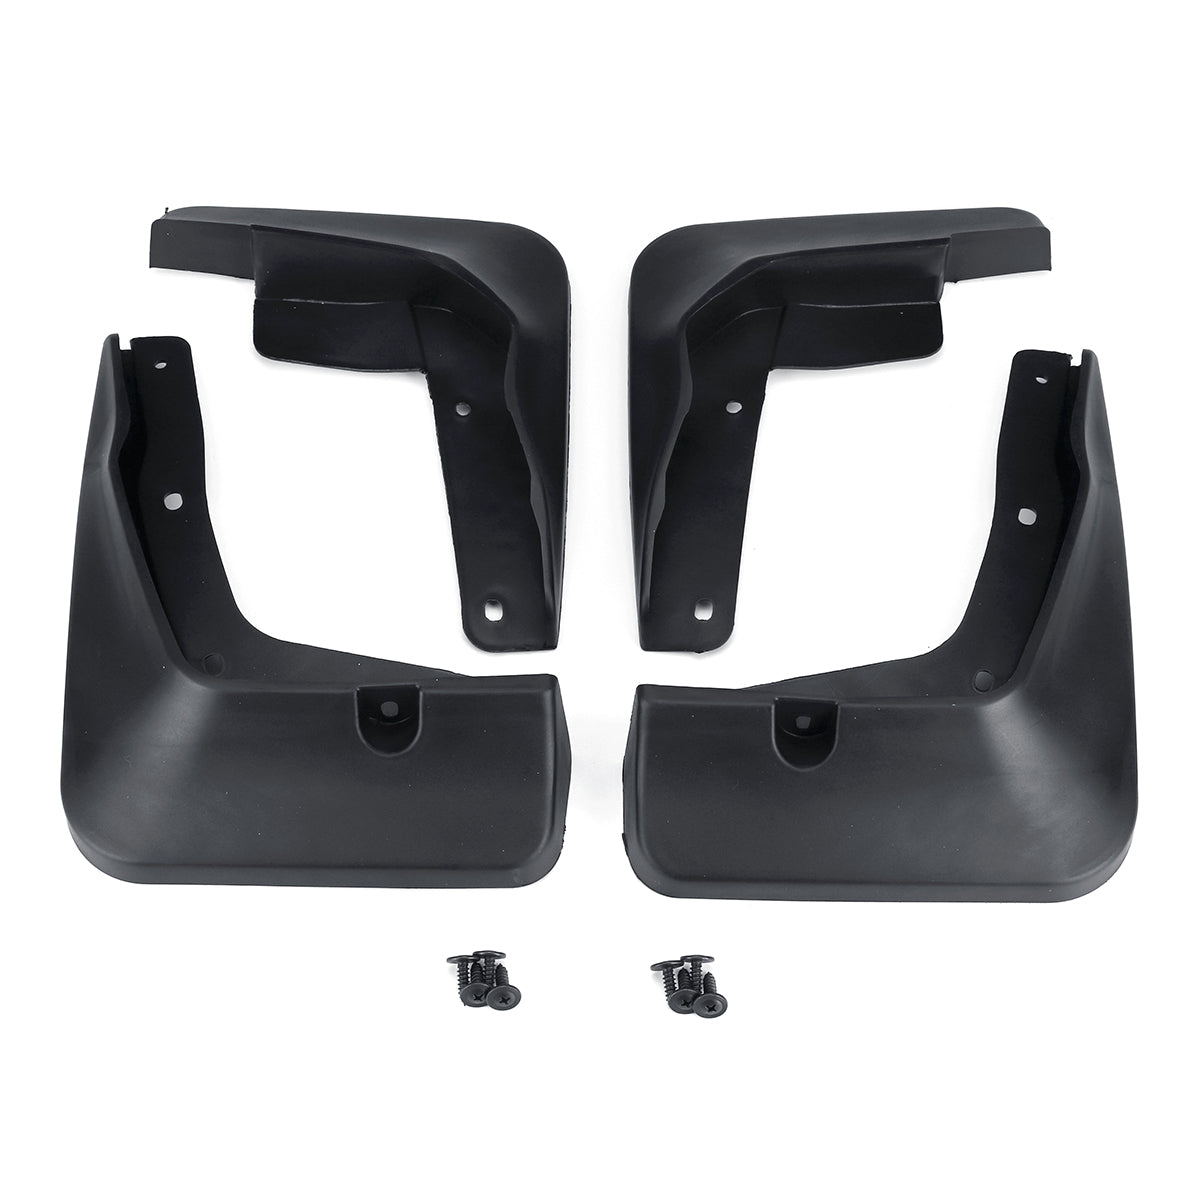 Oshotto Mud Flap (O.E.M Type) For Nissan Micra 2014,2015,2016,2017,2018,2019,2020 (T-II) (Set of 4)